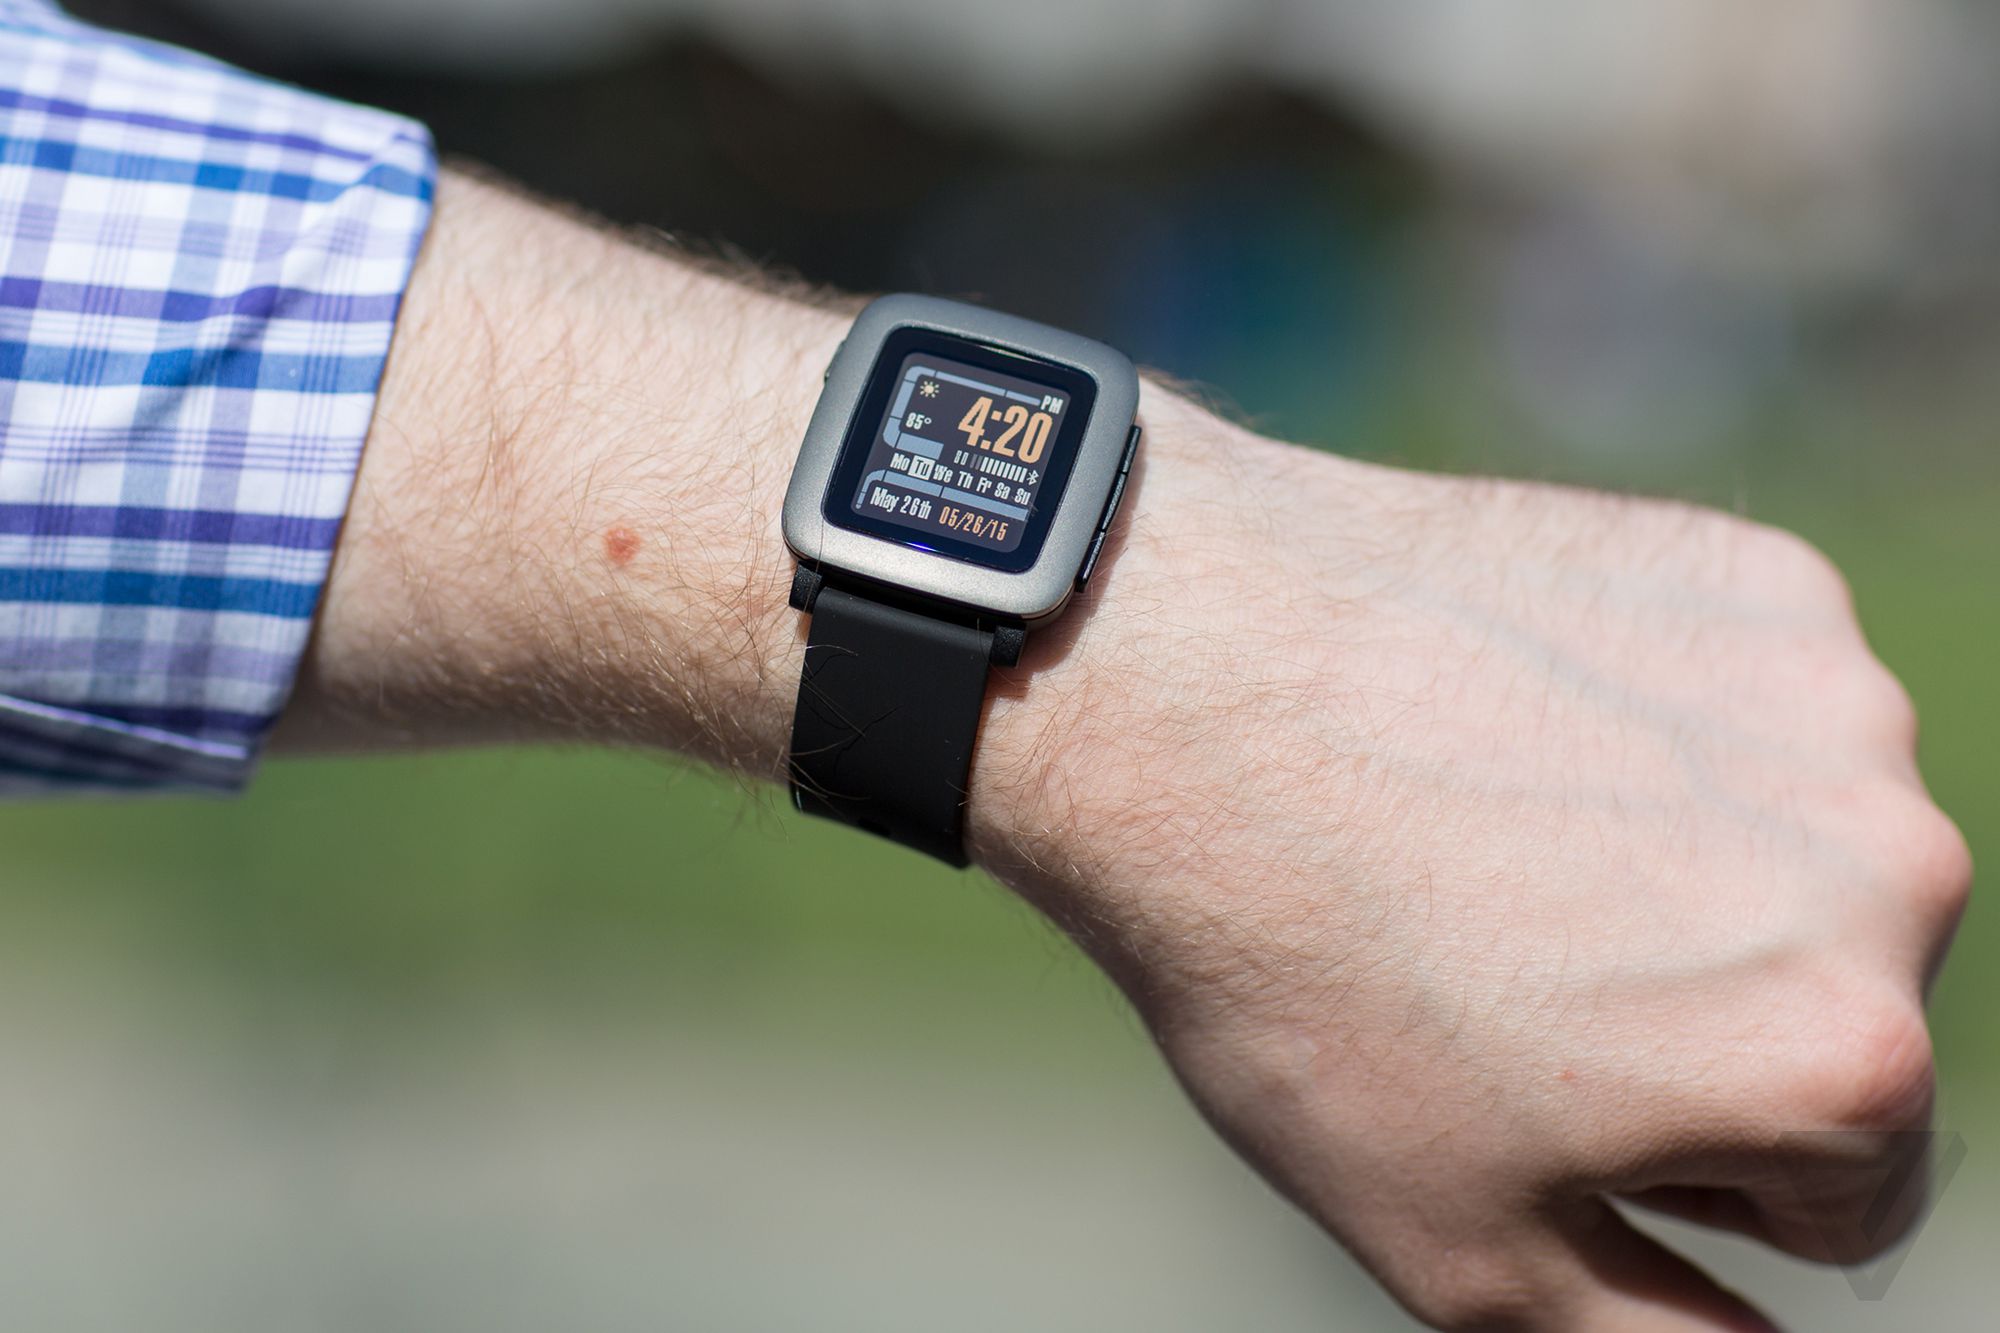 Pebble Smartwatch Pricing: Exploring The Cost Of Pebble Smartwatches